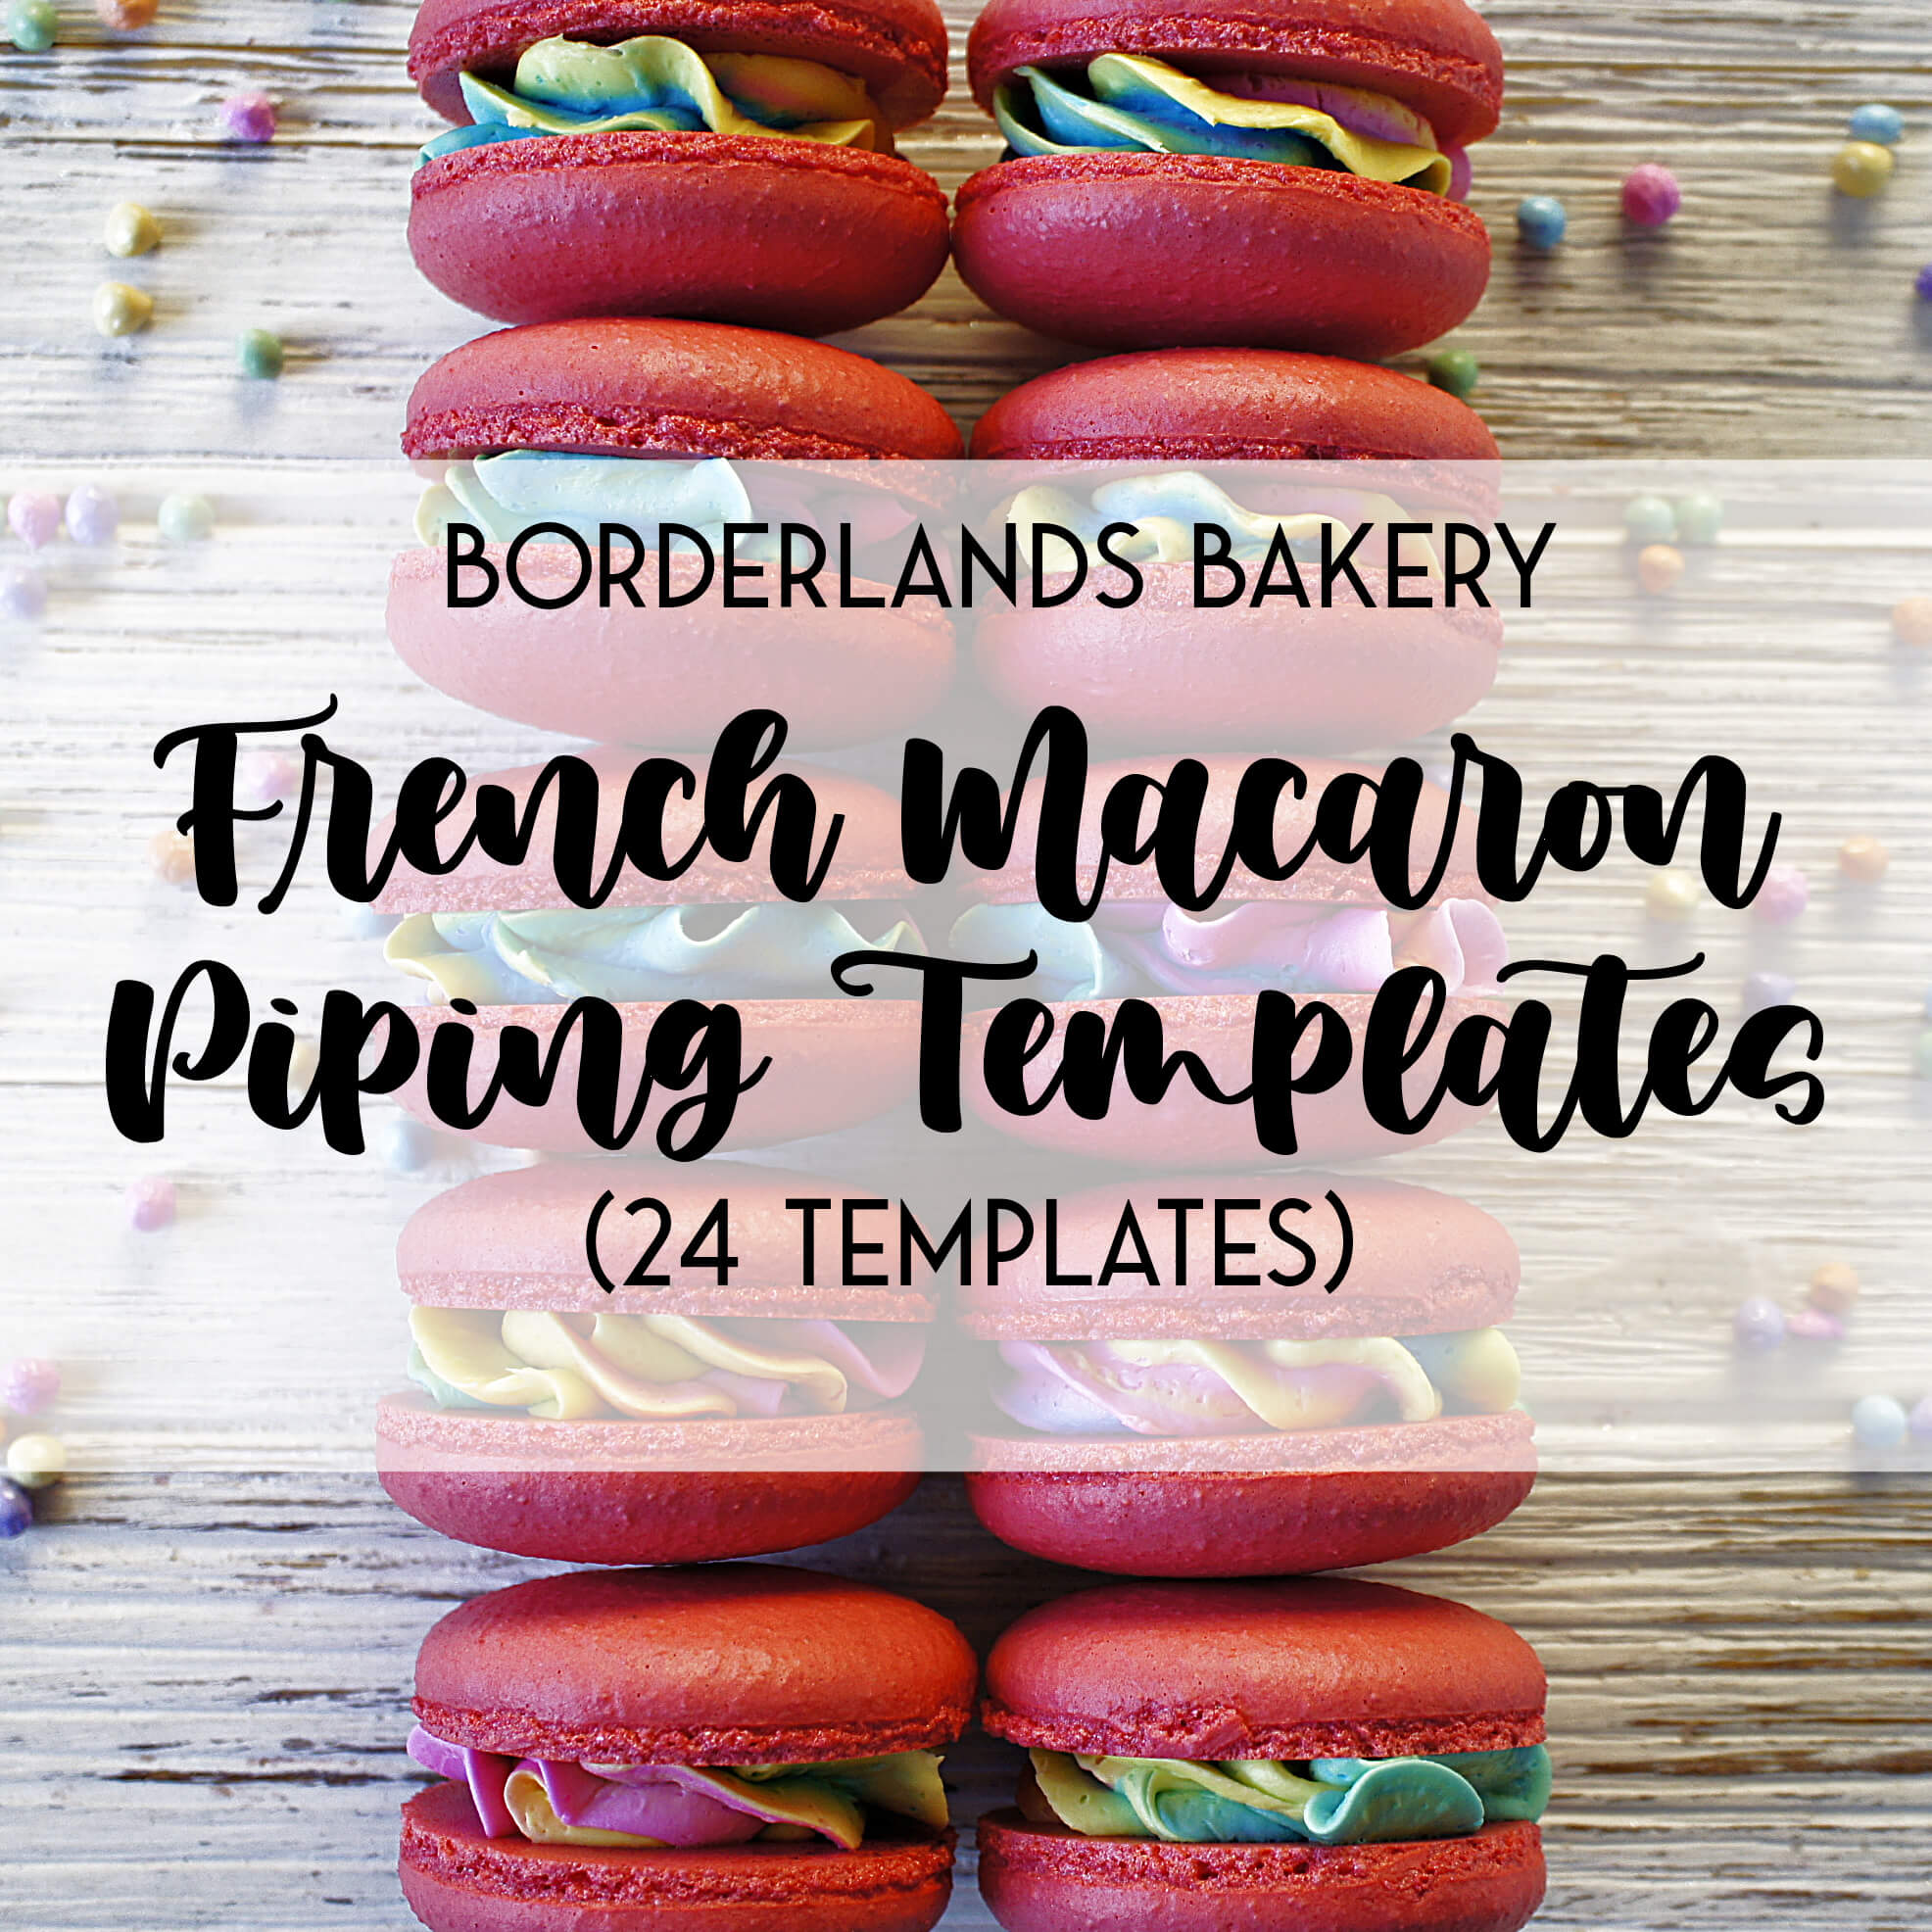 24 French Macaron Piping Templates (Zip File Download)